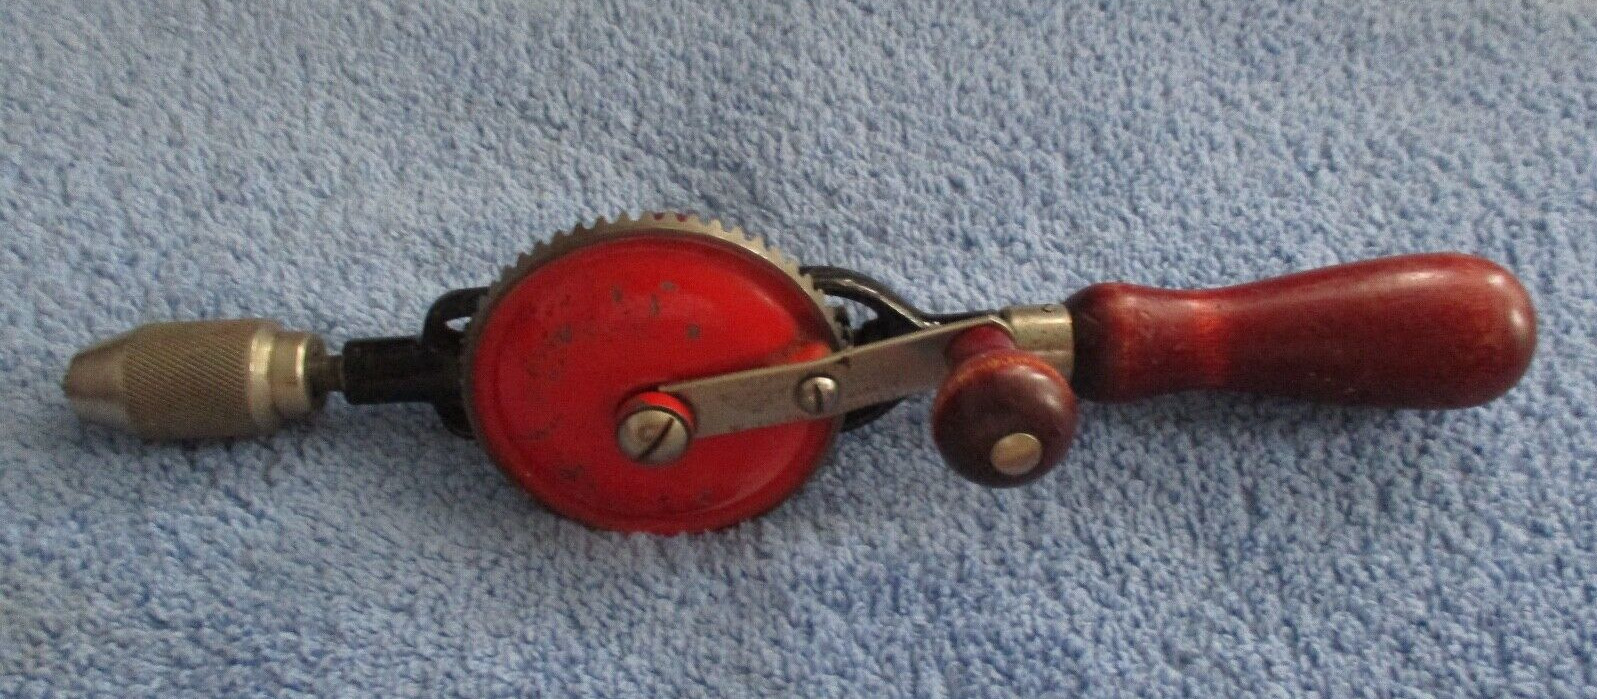 VINTAGE MILLERS FALLS COMPANY NO. 77 EGG BEATER HAND DRILL